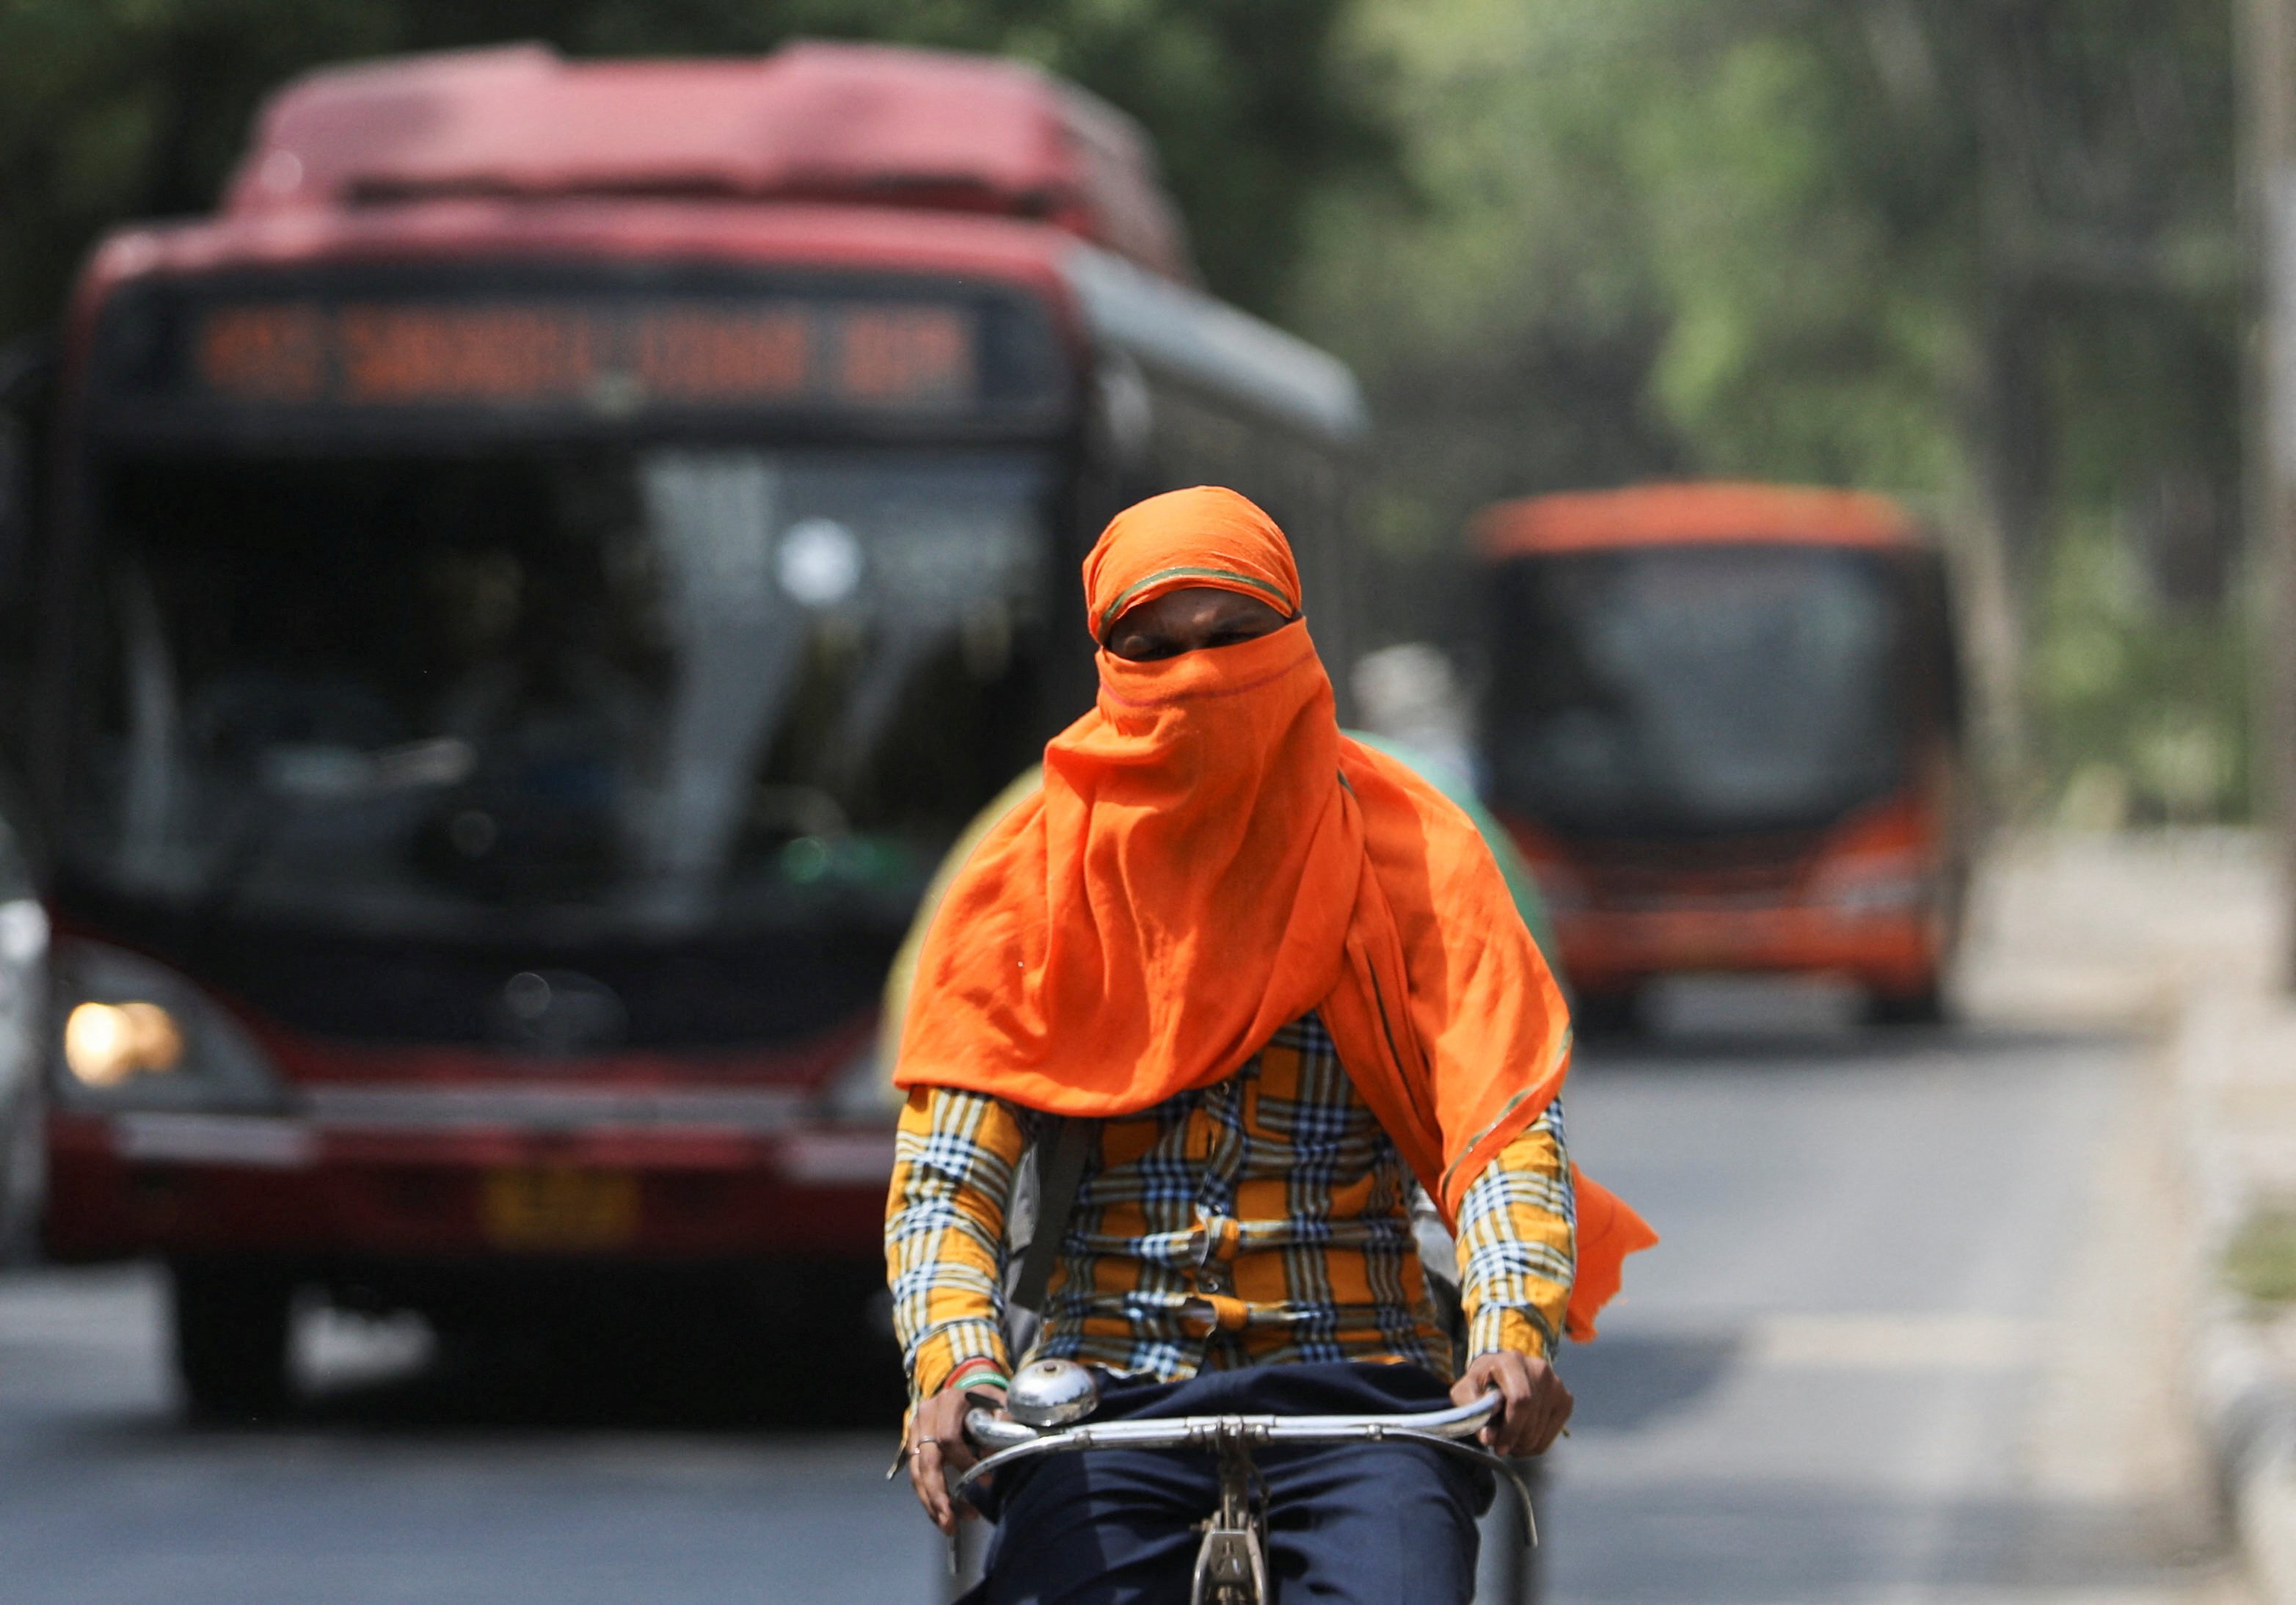 A man rides a cycle with his face fully covered on a hot summer day, in New Delhi